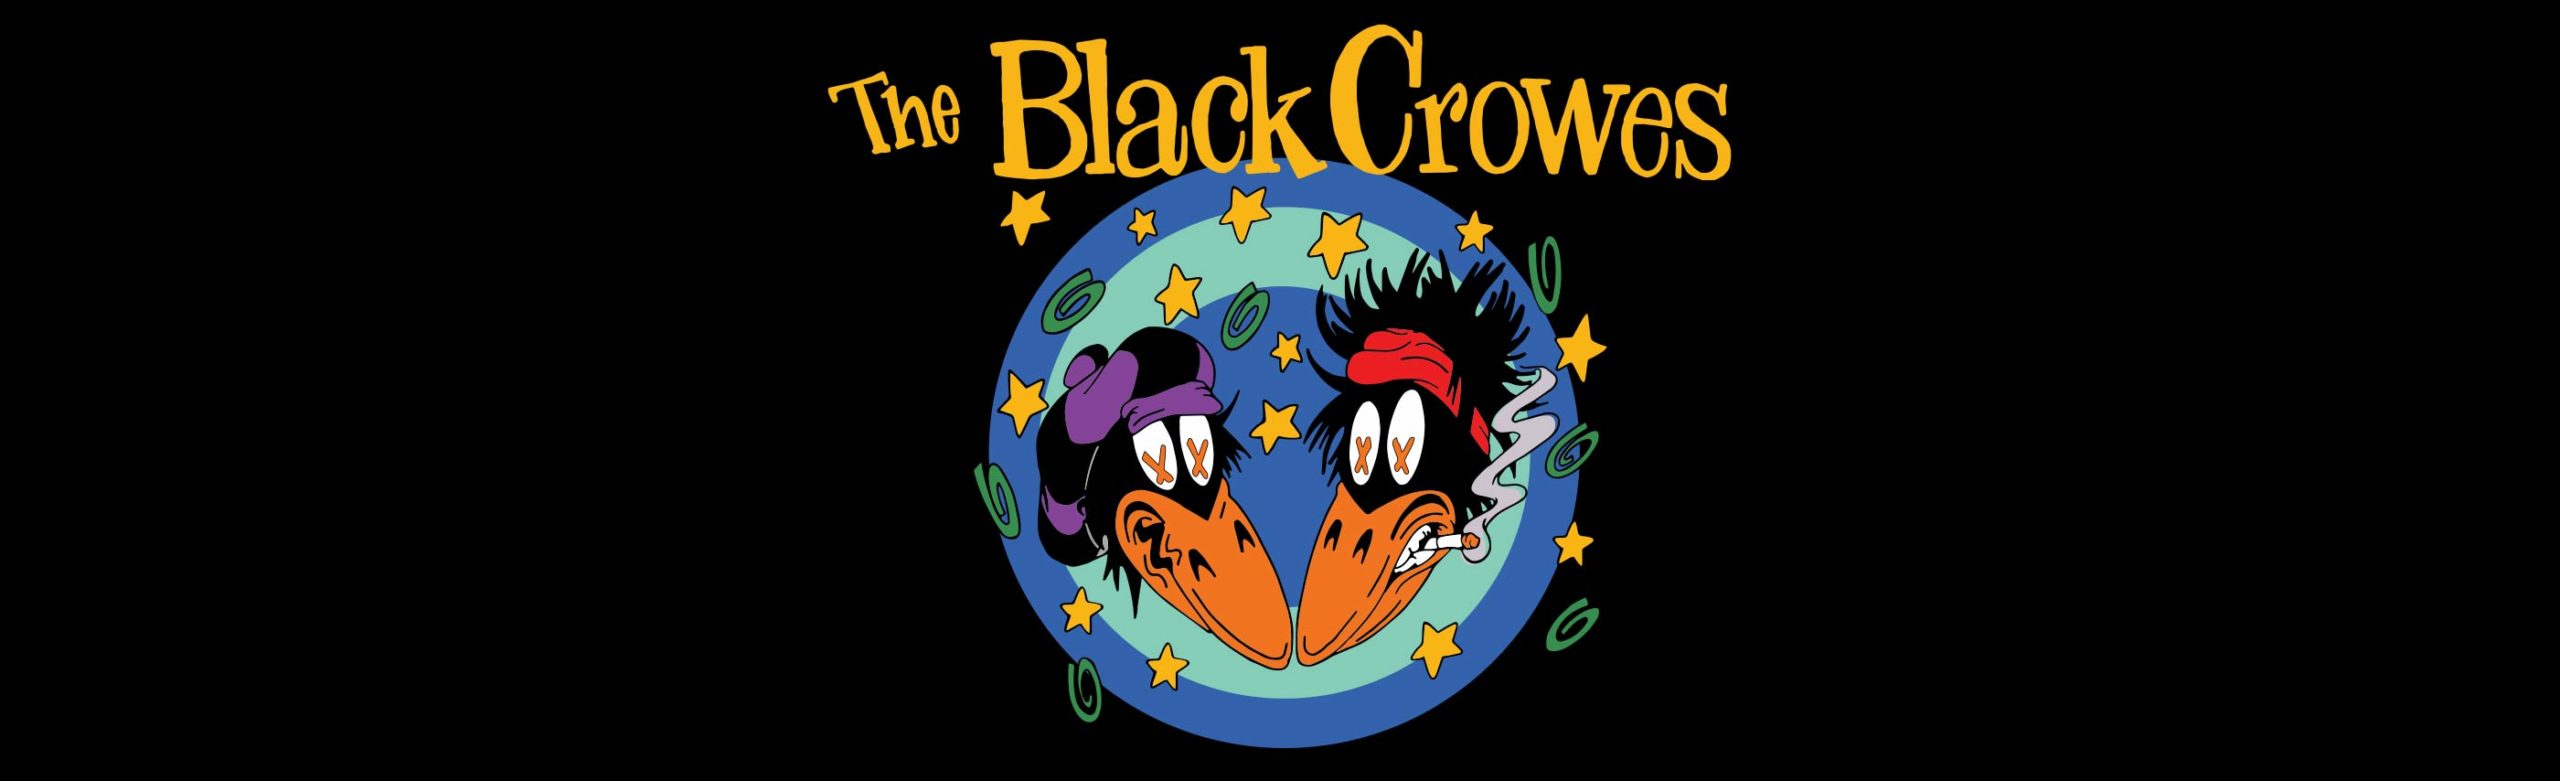 The Black Crowes to Play ‘Shake Your Money Maker’ and More Hits at KettleHouse Amphitheater Image